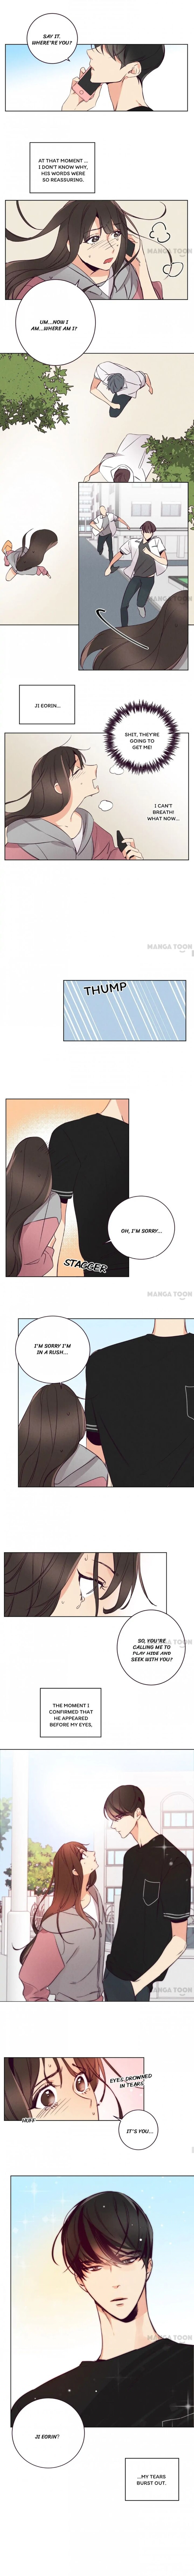 Love At First Sight Doseon Chapter 6 Page 4